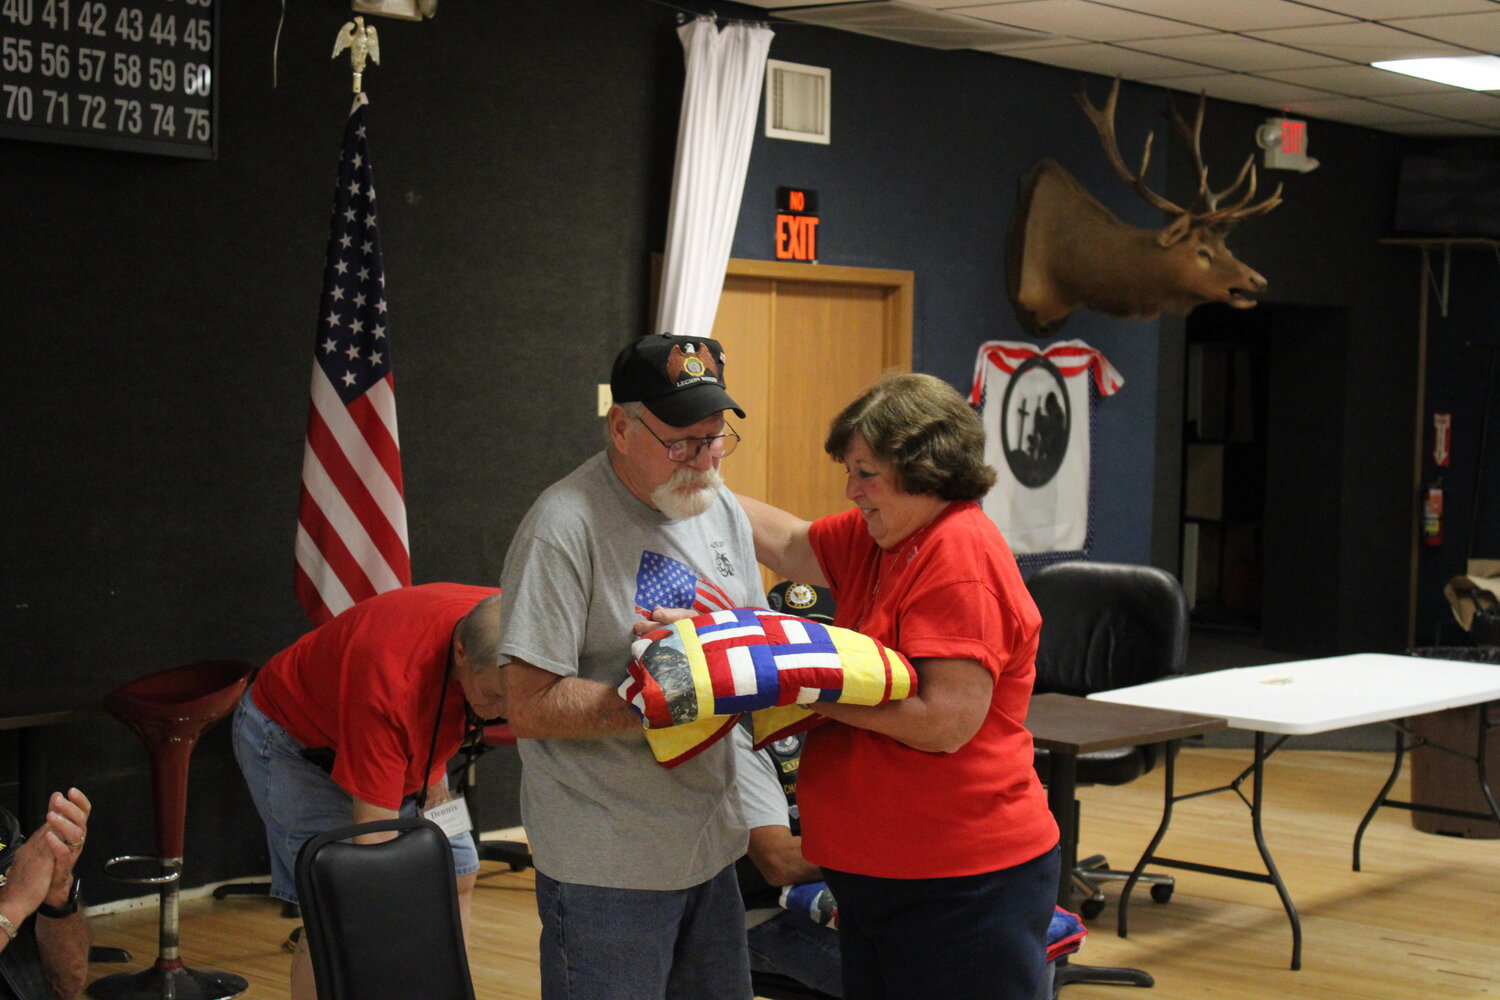 Rob Miller and Marlene Walton look at the quilt presented to the Warrenton veteran in honor of his military service.